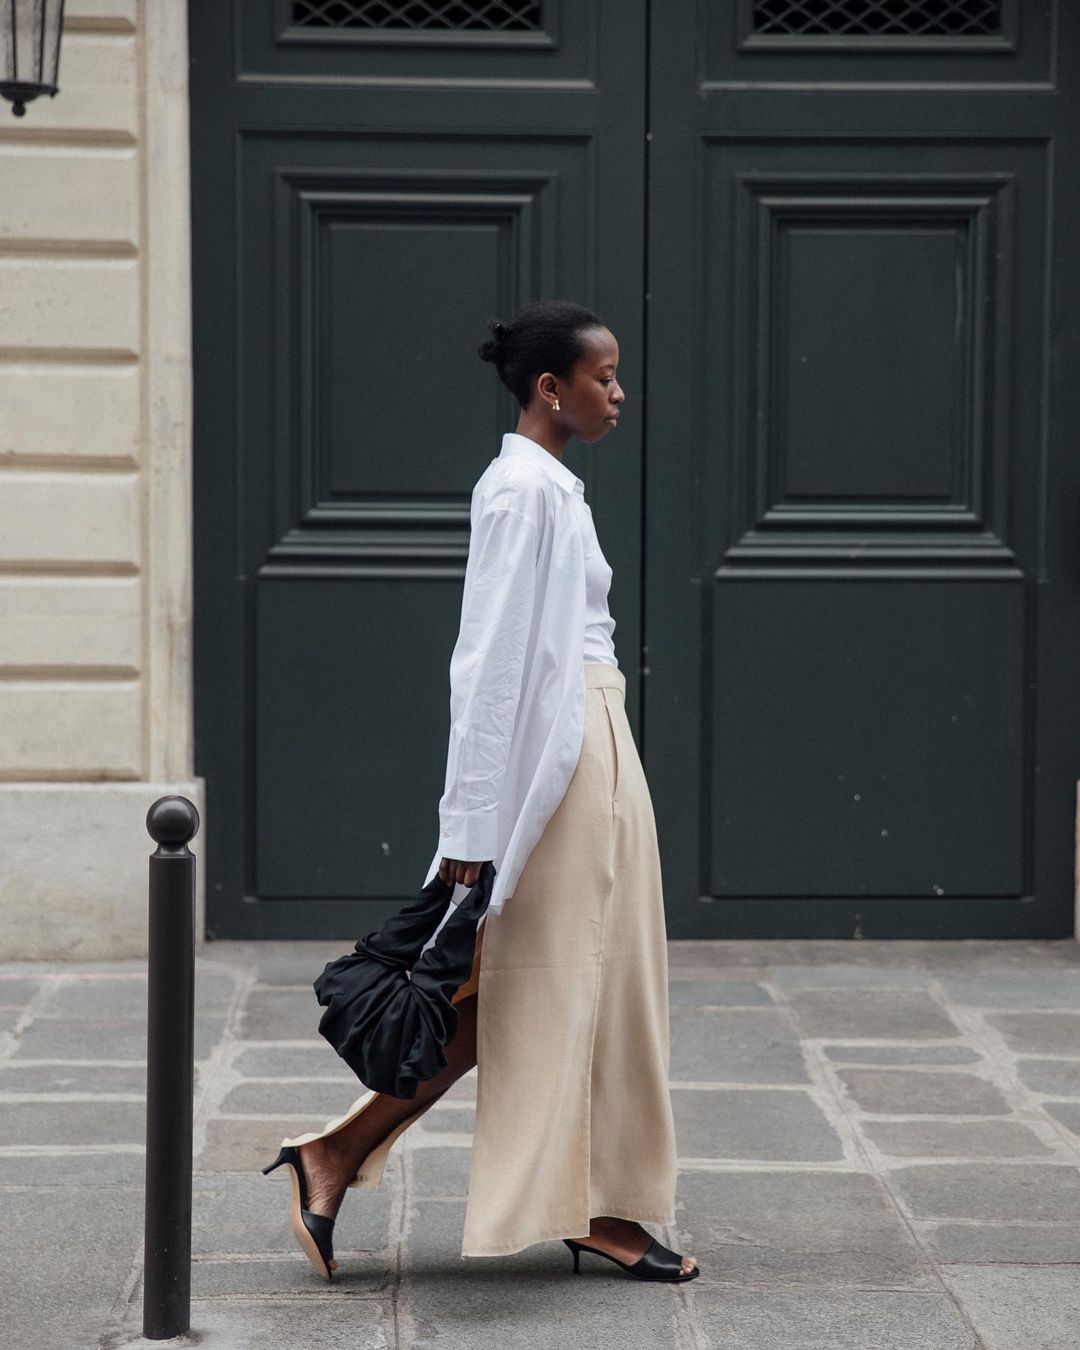 Expensive-looking outfits: @sylviemus_